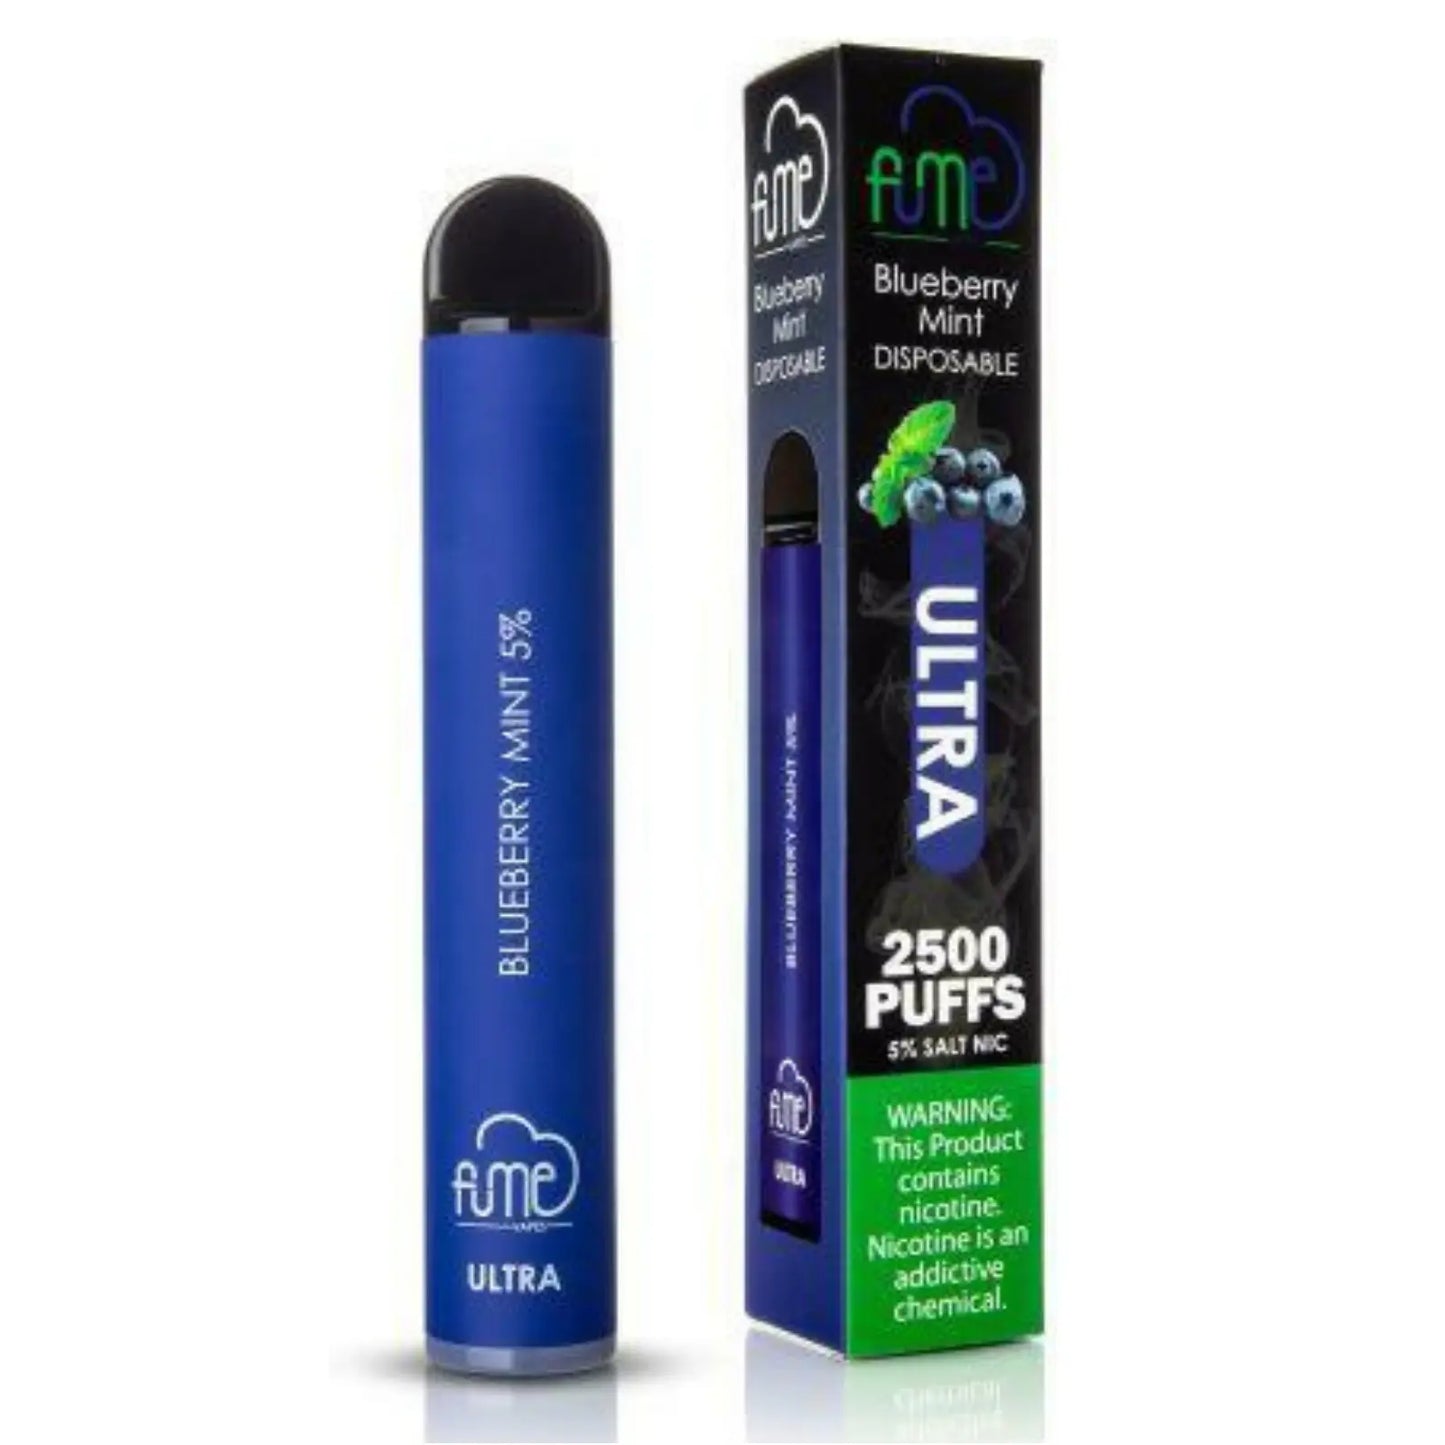 Fume Extra Disposable 1500 Puffs - Blueberry Mint